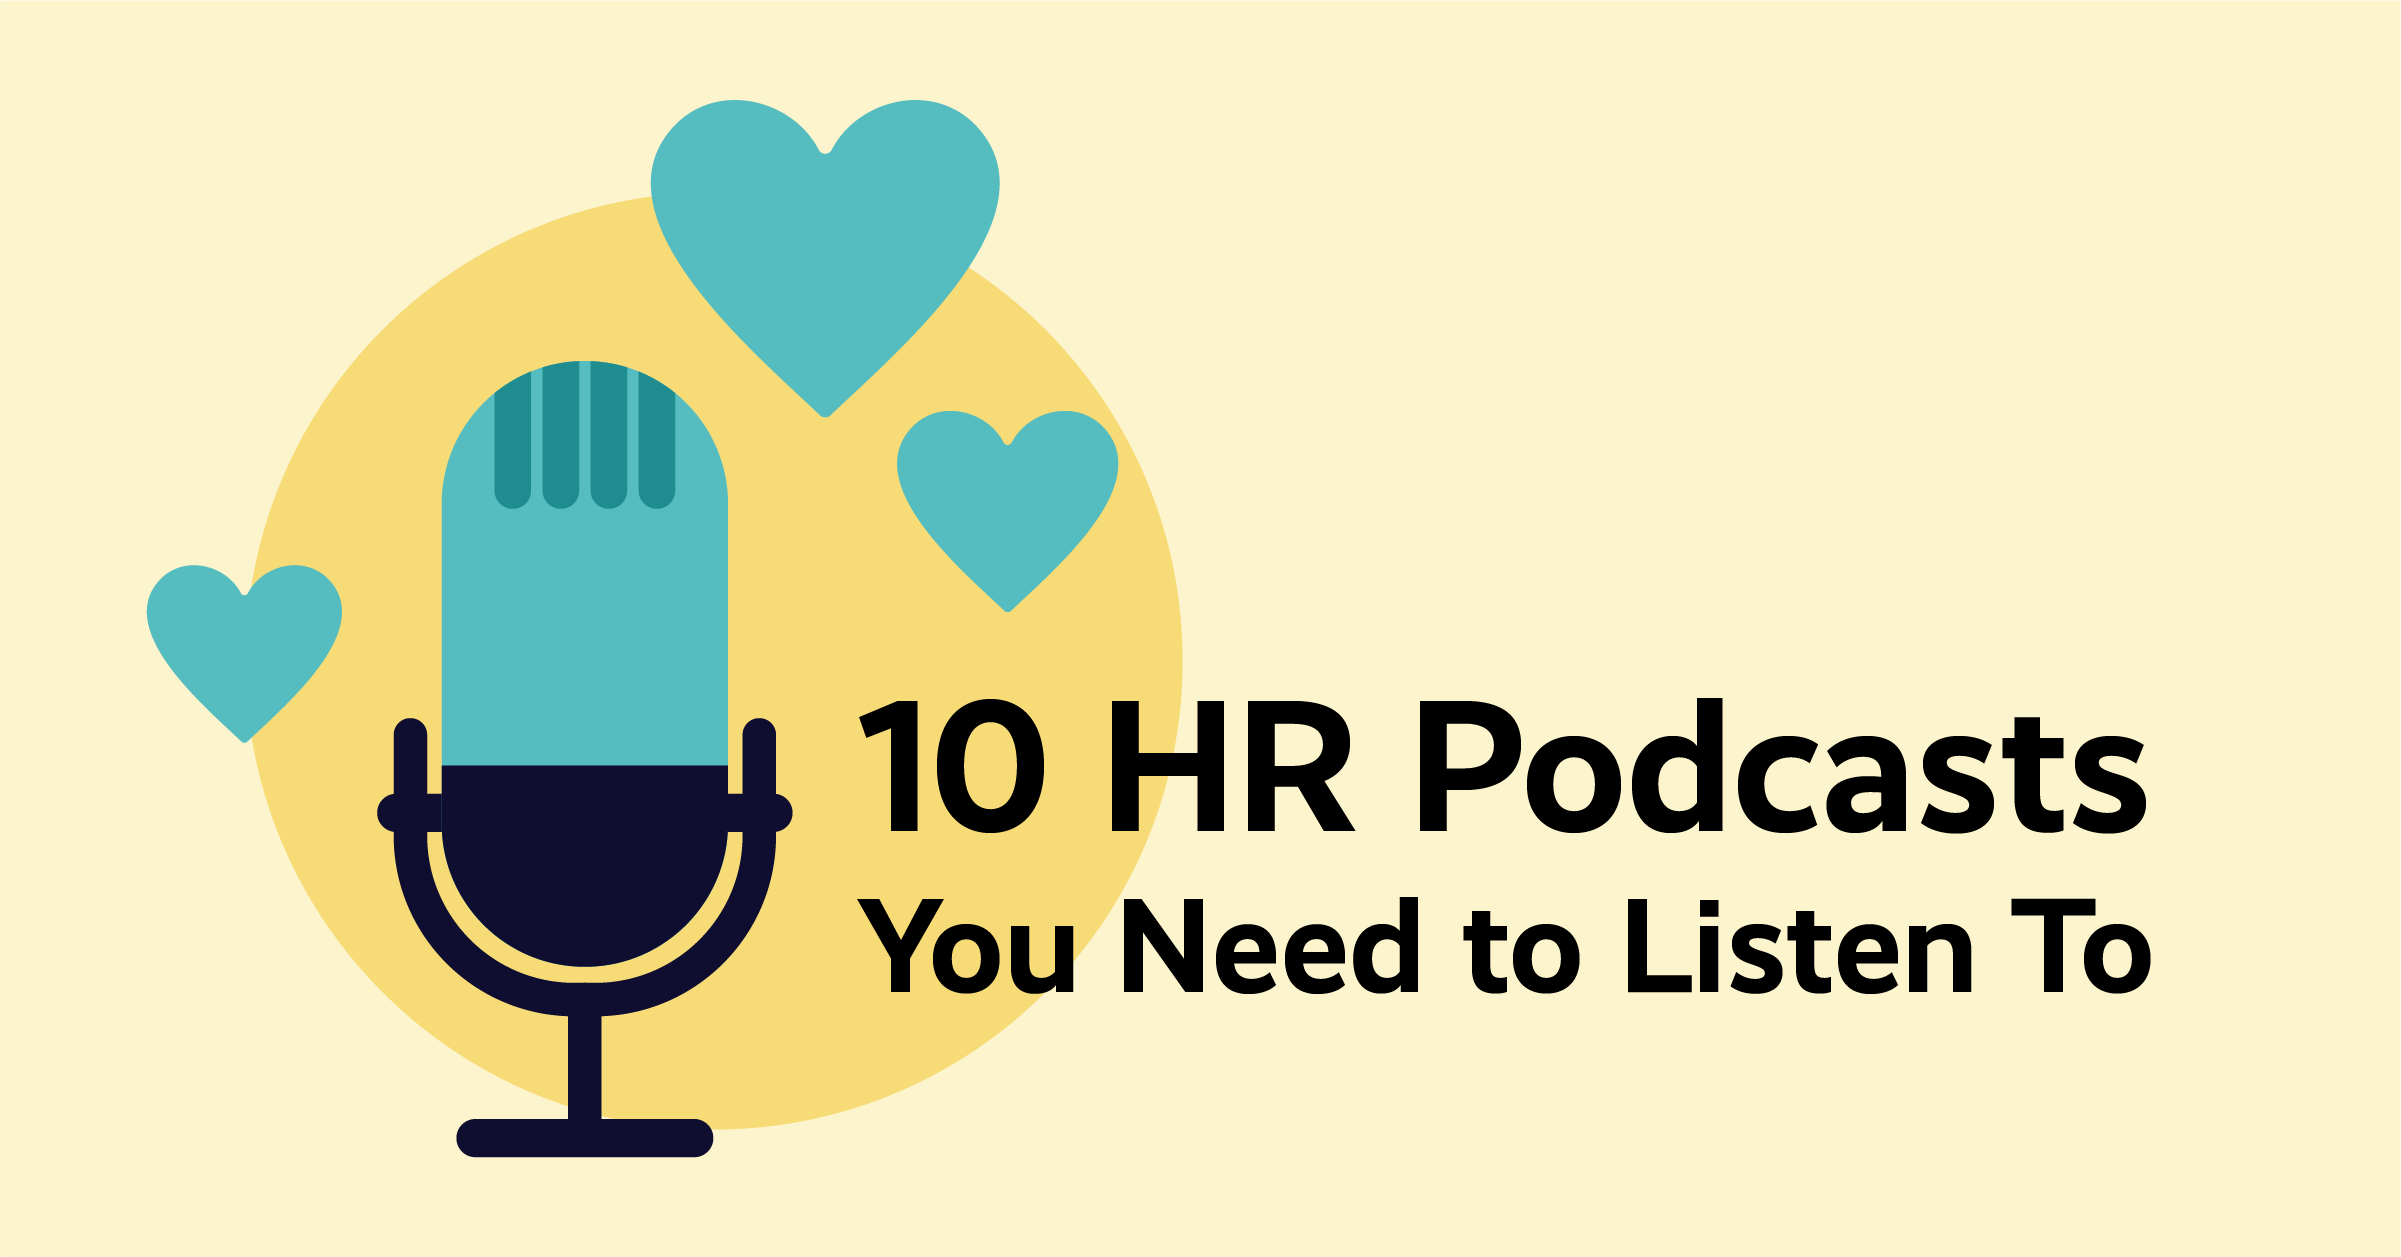 10 HR Podcasts You Need to Listen To